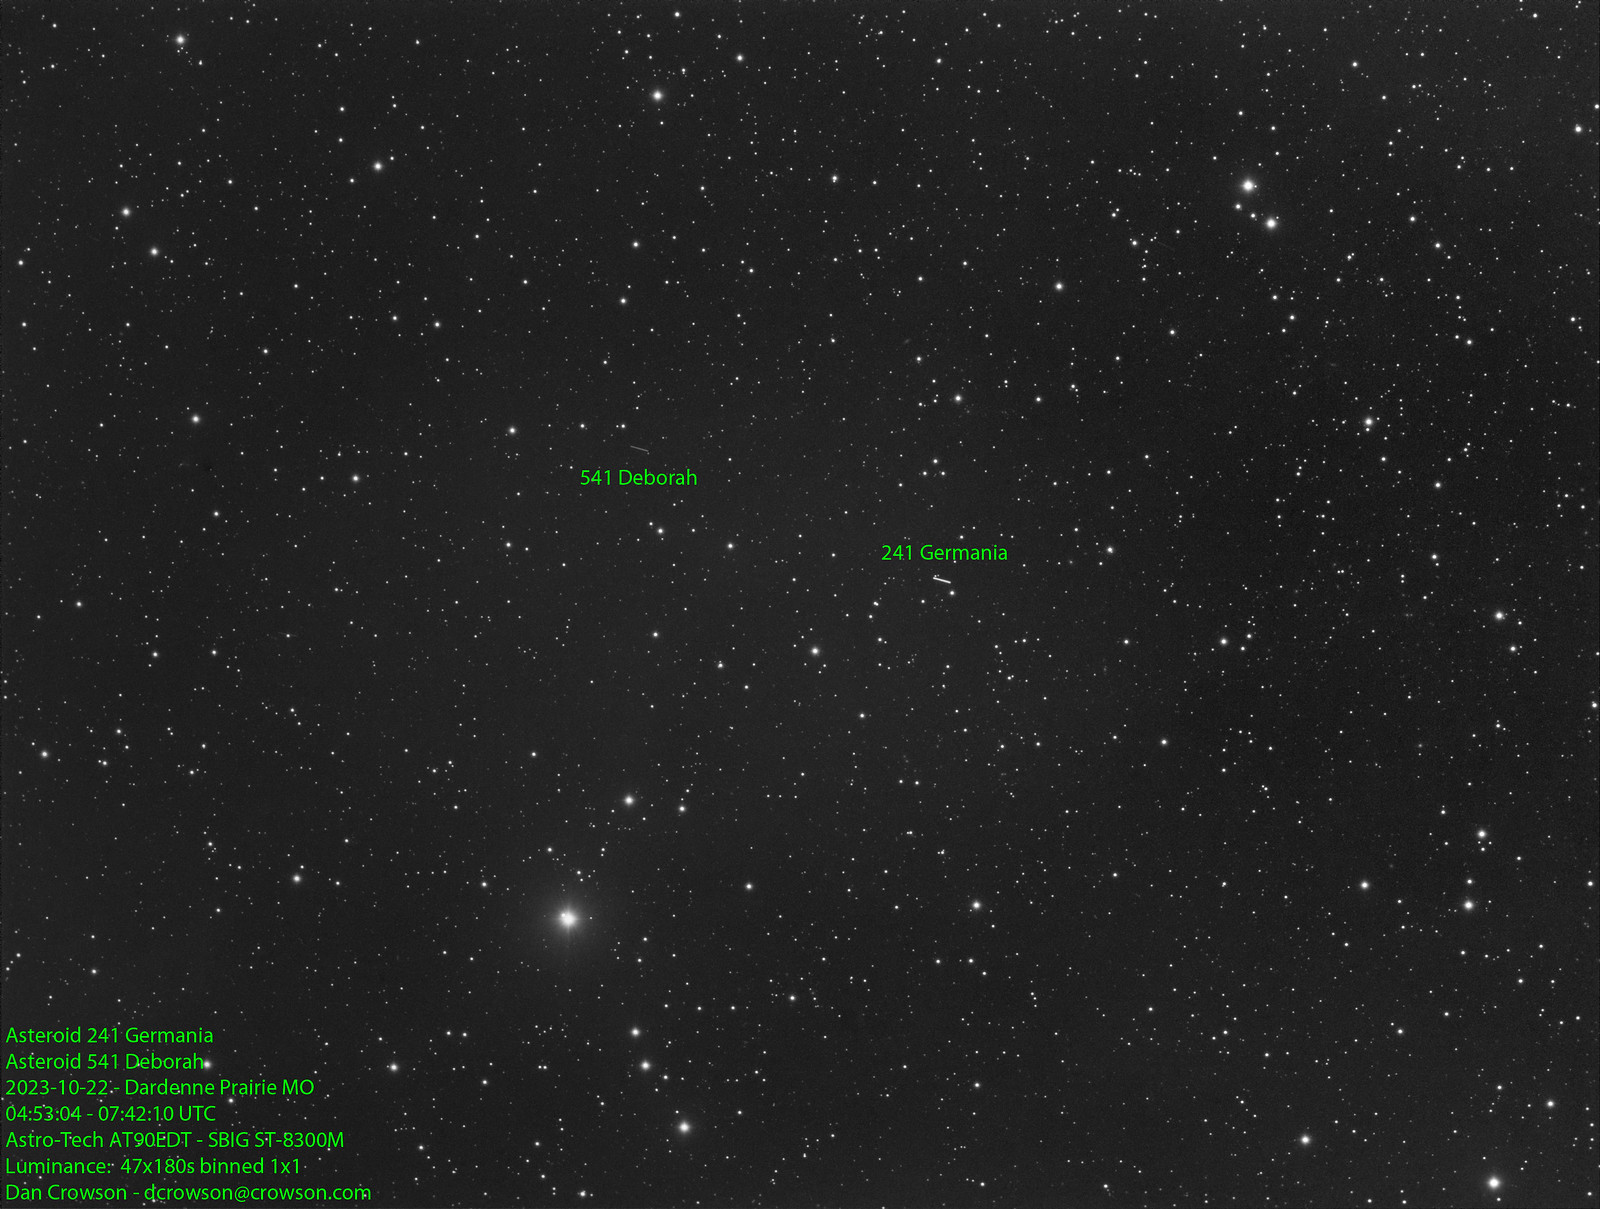 Asteroid 241 Germania - 47x180s - 2023-10-22